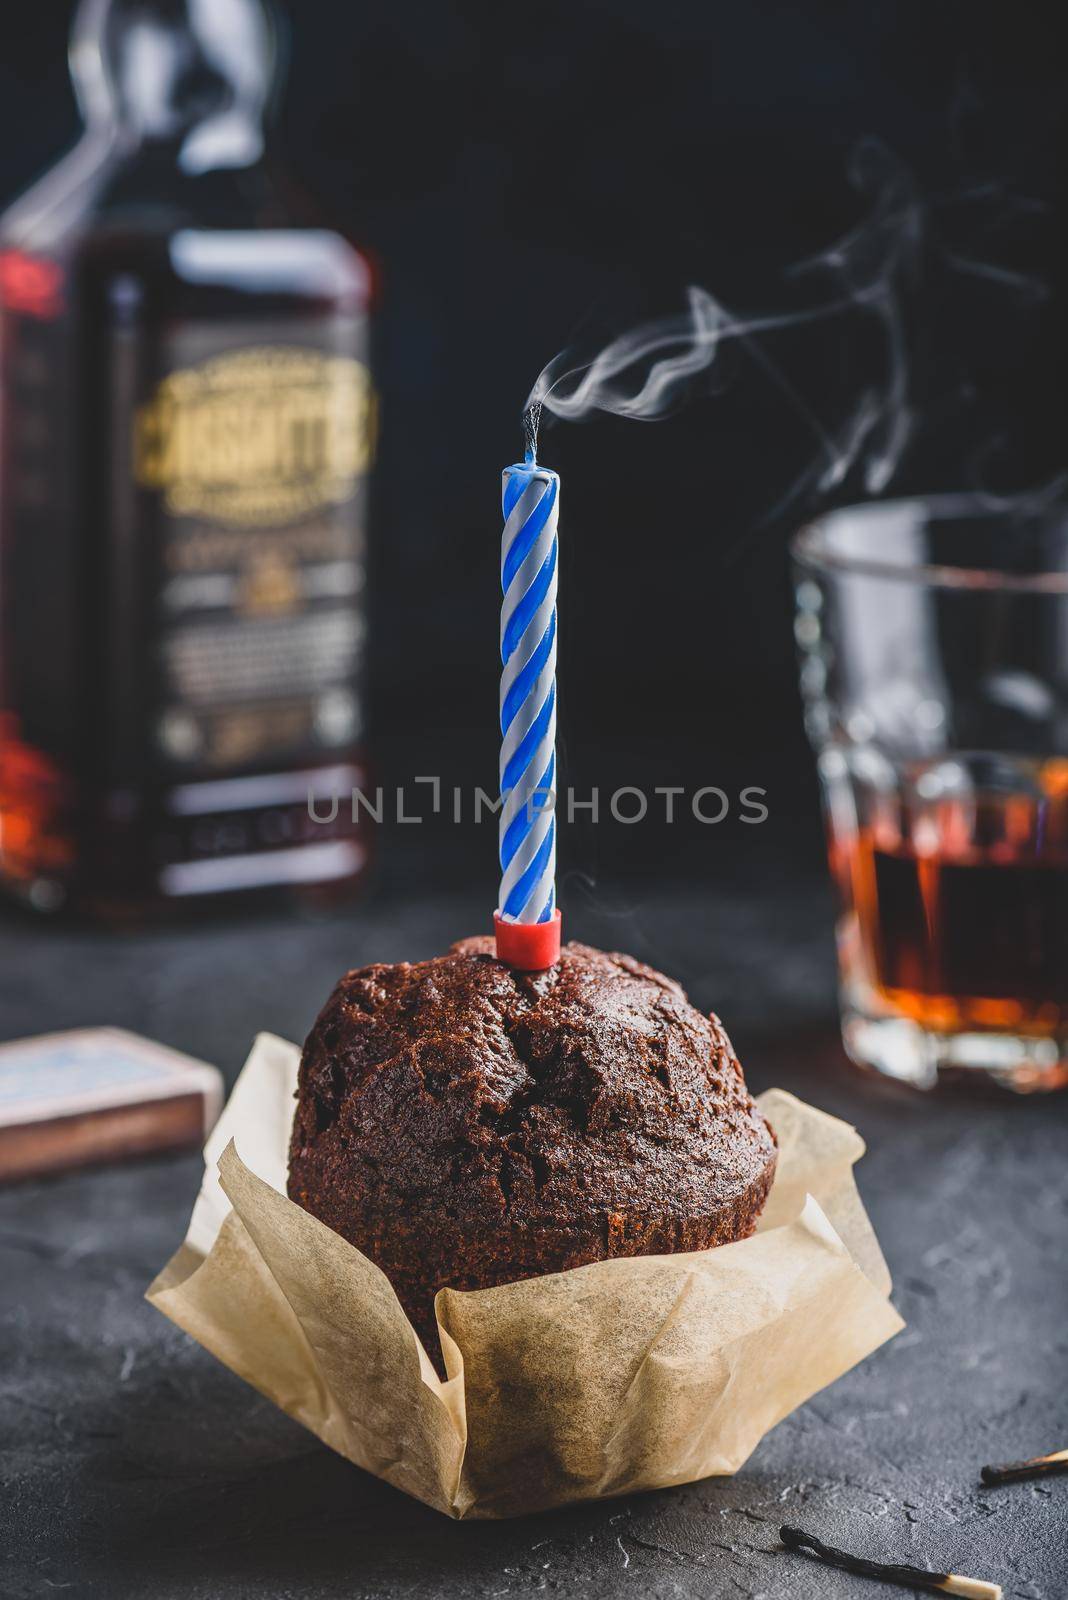 Birthday chocolate muffin with smoking candle by Seva_blsv